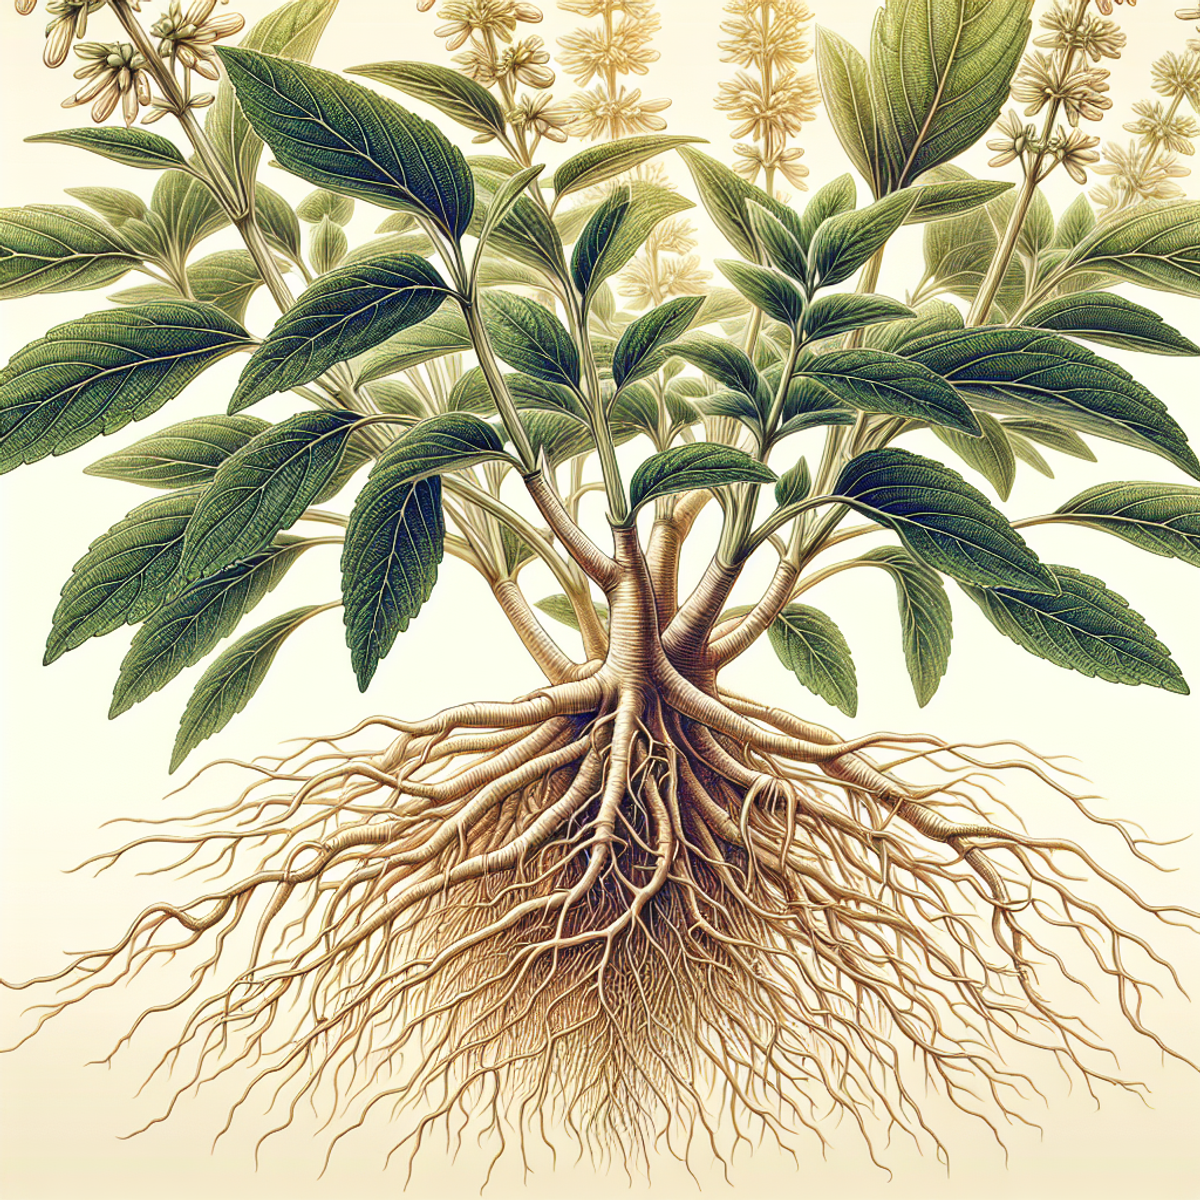 Close-up image of Ashwagandha plant roots with soil and intricate root structure.